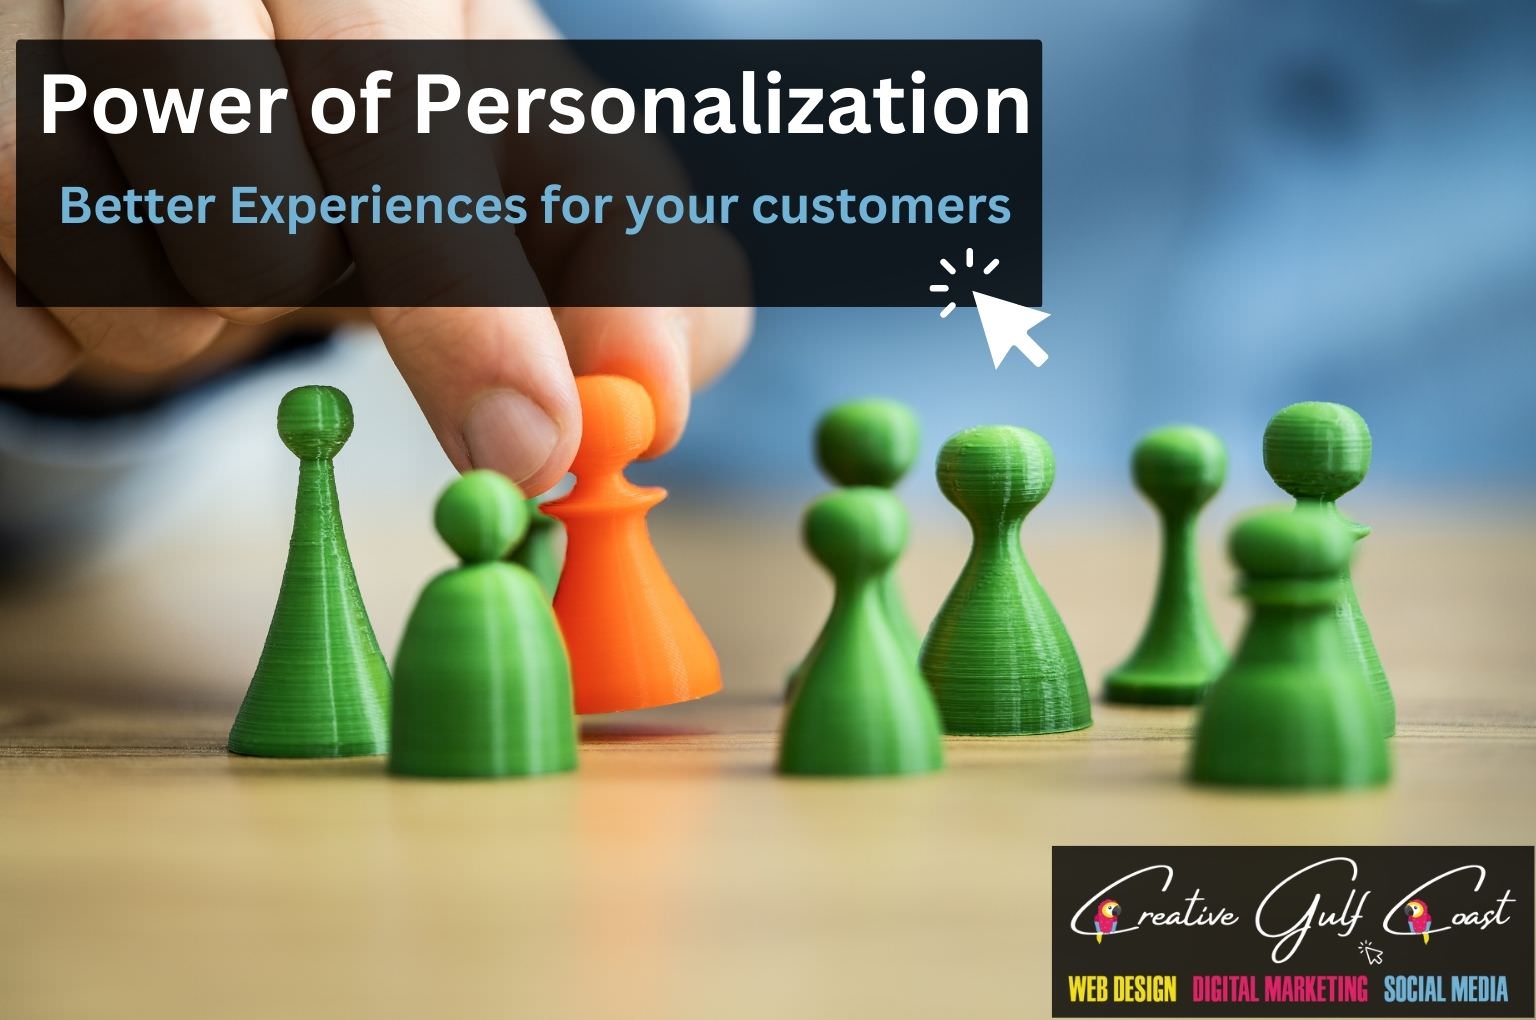 Personalized Marketing for companies - the power of tailored customer experiences - advisor text by creative gulf coast marketing agency tampa